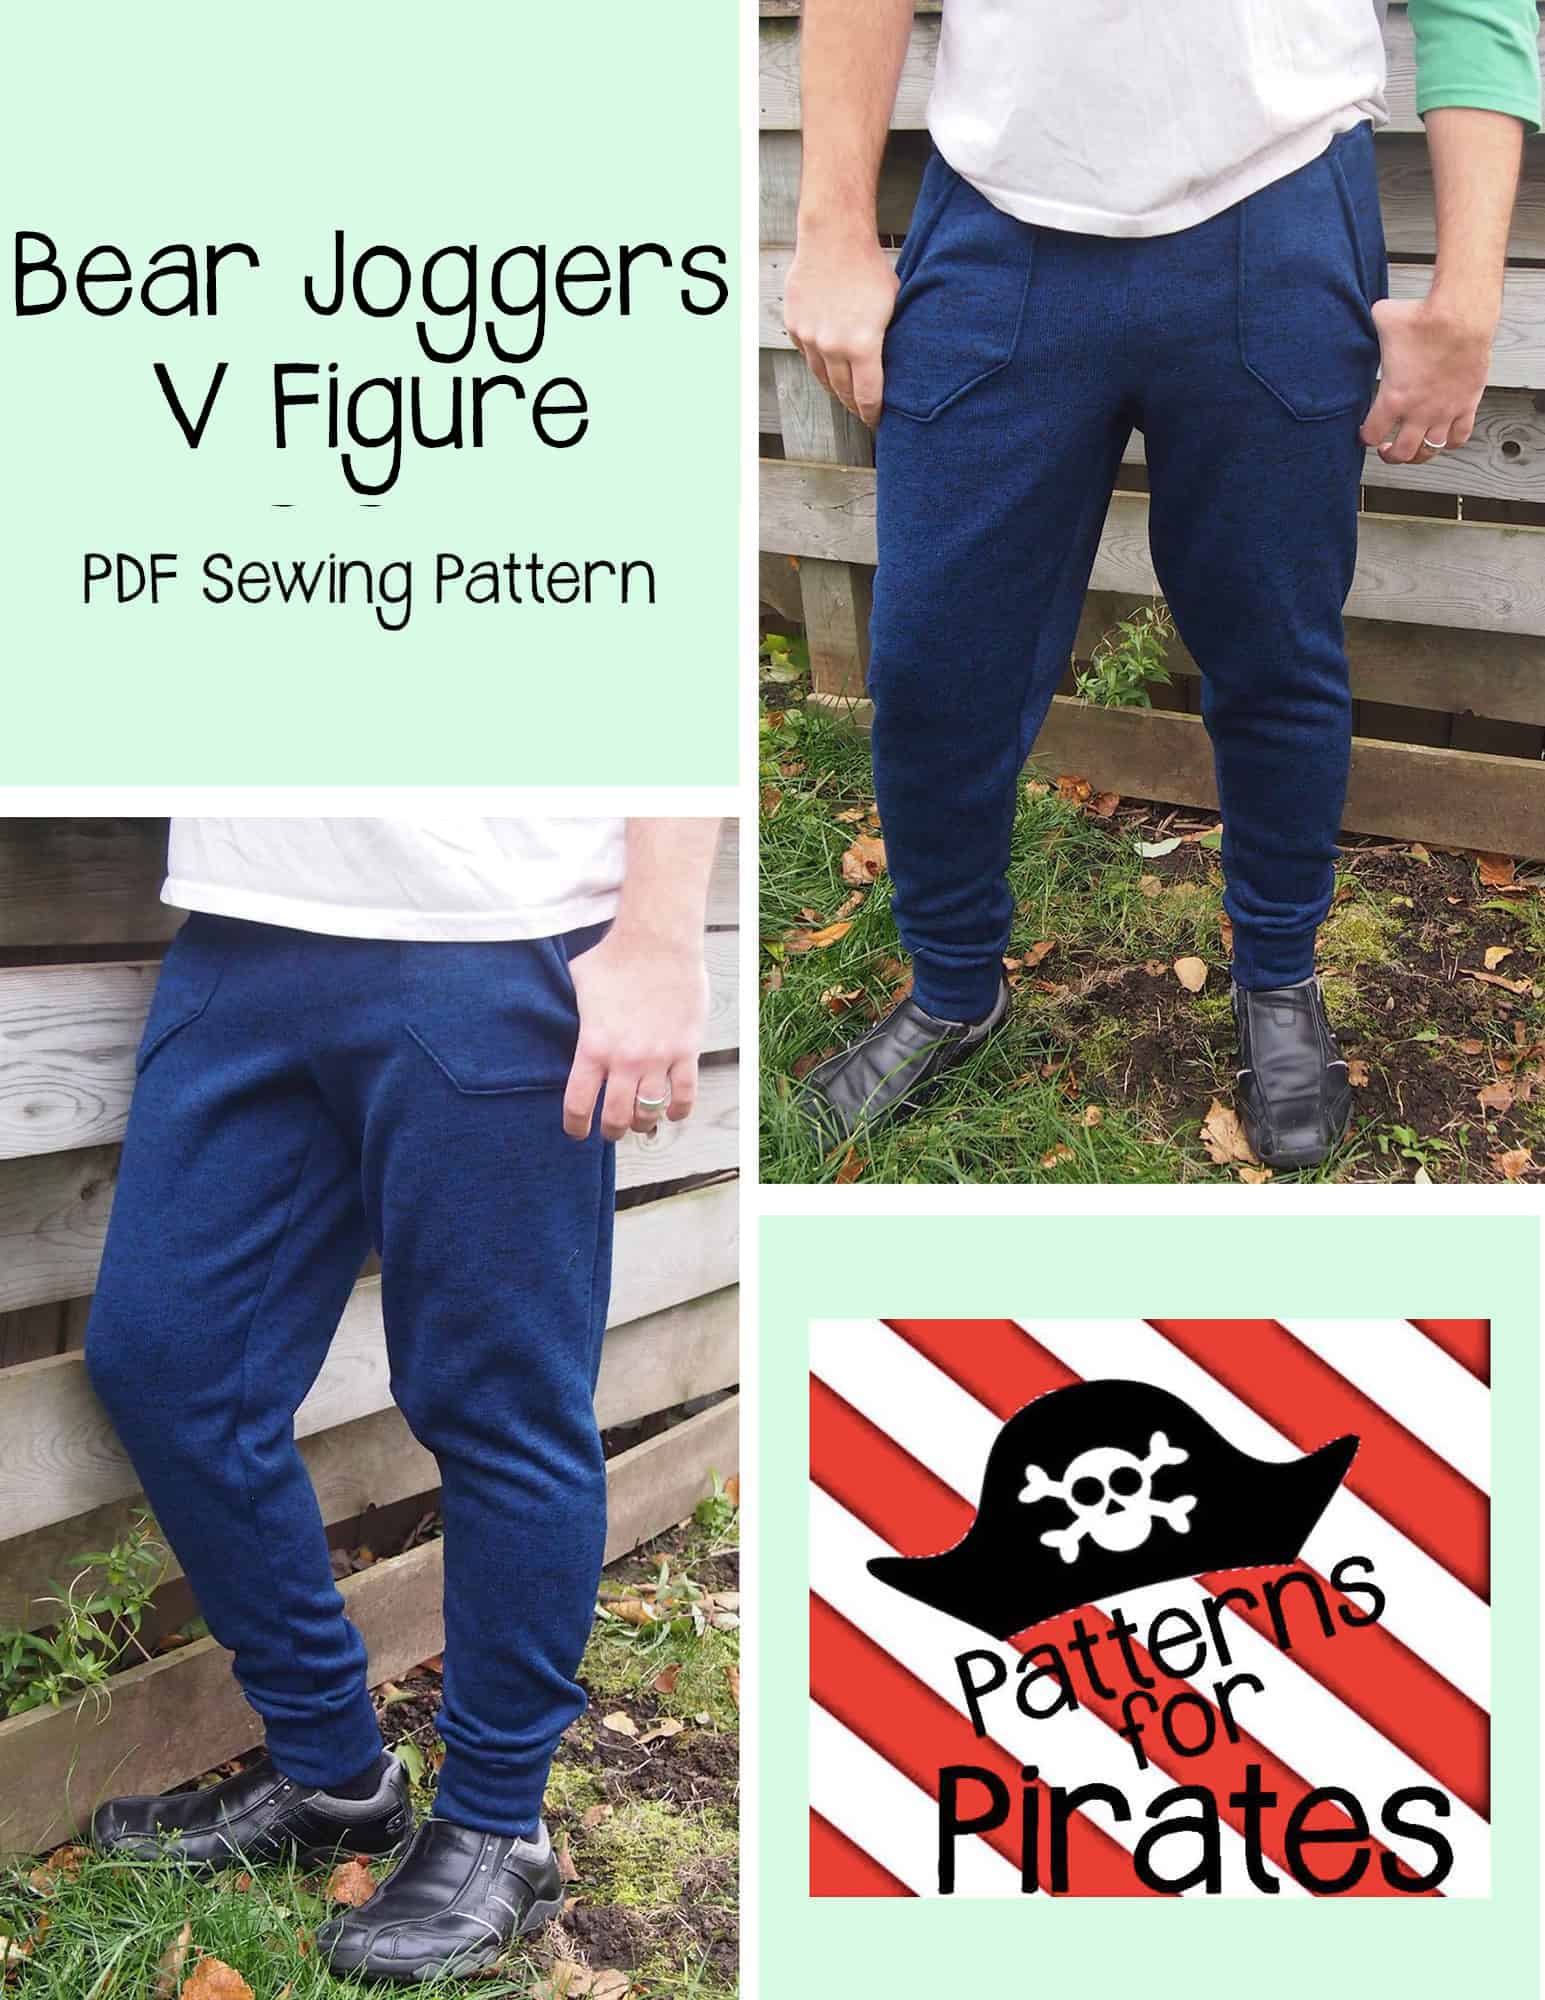 Bear Joggers - V Figure - Patterns for Pirates